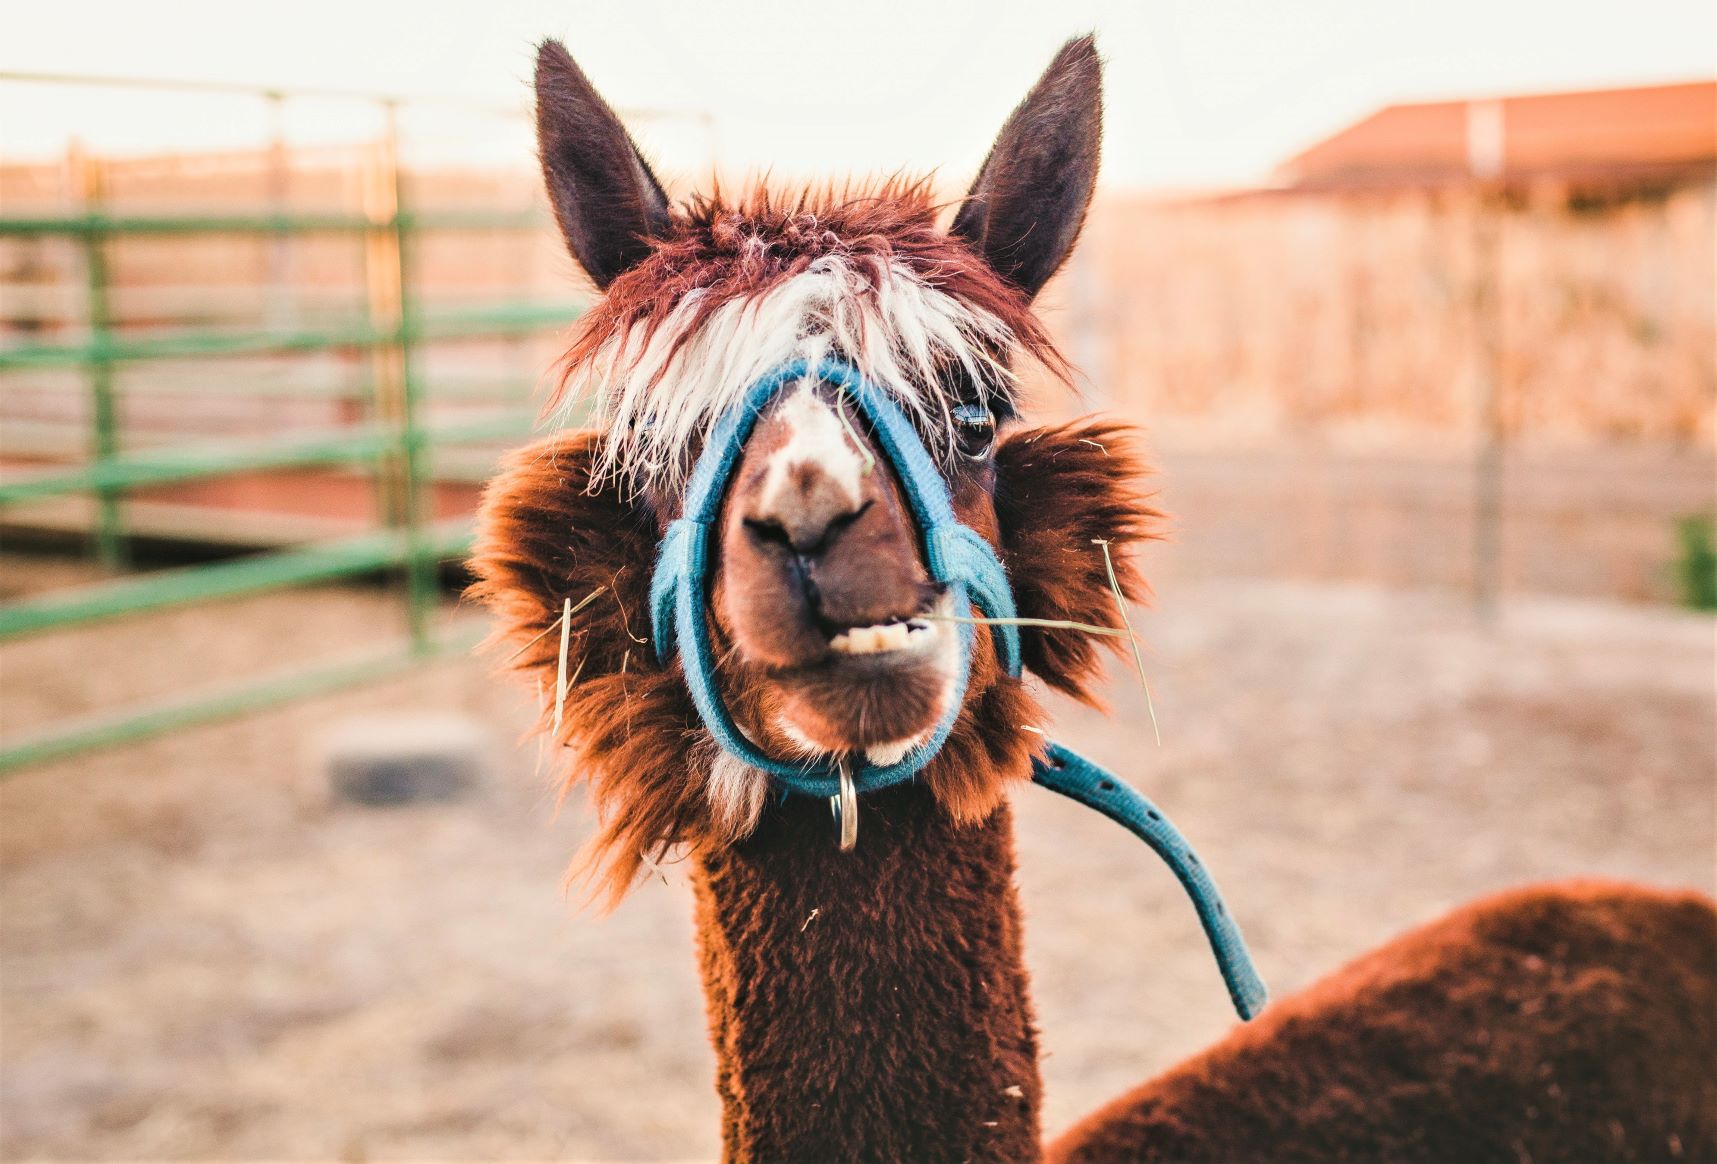 "Alpaca it in for Life on the Farm" - Monzo Co-Founder Heads for Greener Pastures